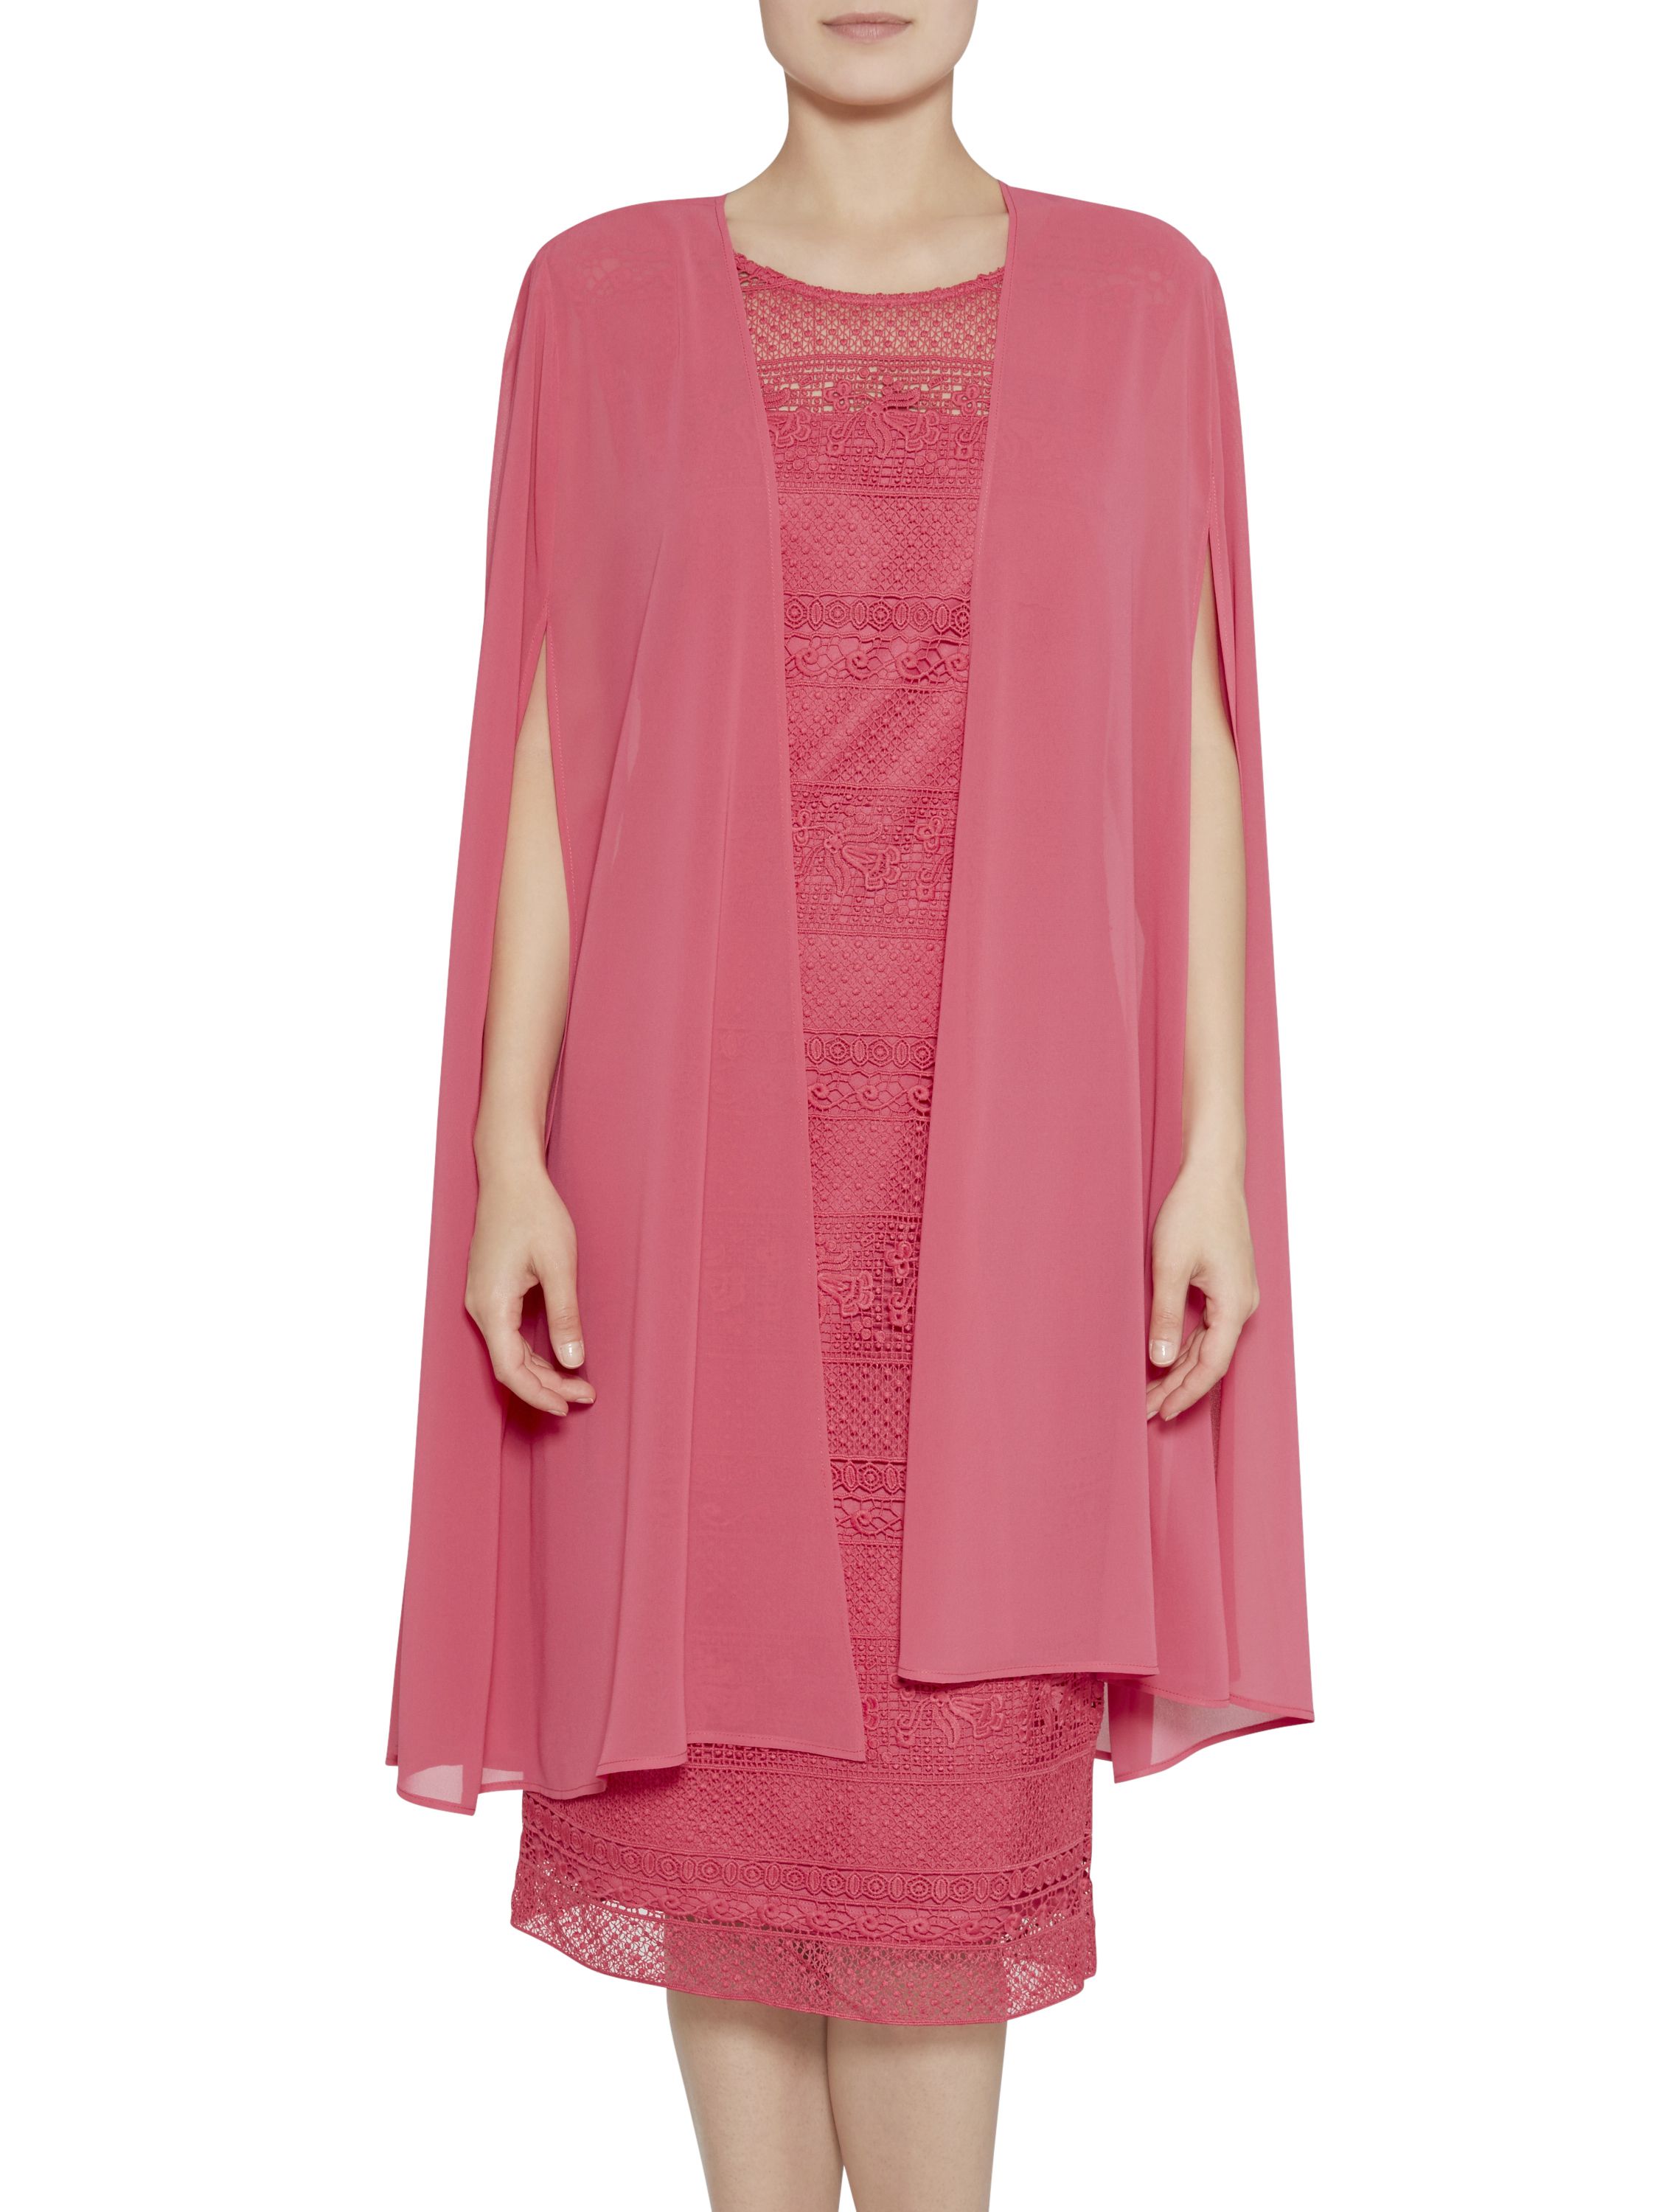 Complete any evening look and feel stunning on those chilly nights with this chiffon cape by Gina Bacconi. The cape is made out of chiffon and is crafted to sit effortlessly on the shoulders. Long and elegant, the cape features armholes for ease of movement. The perfect cover up for any dress.